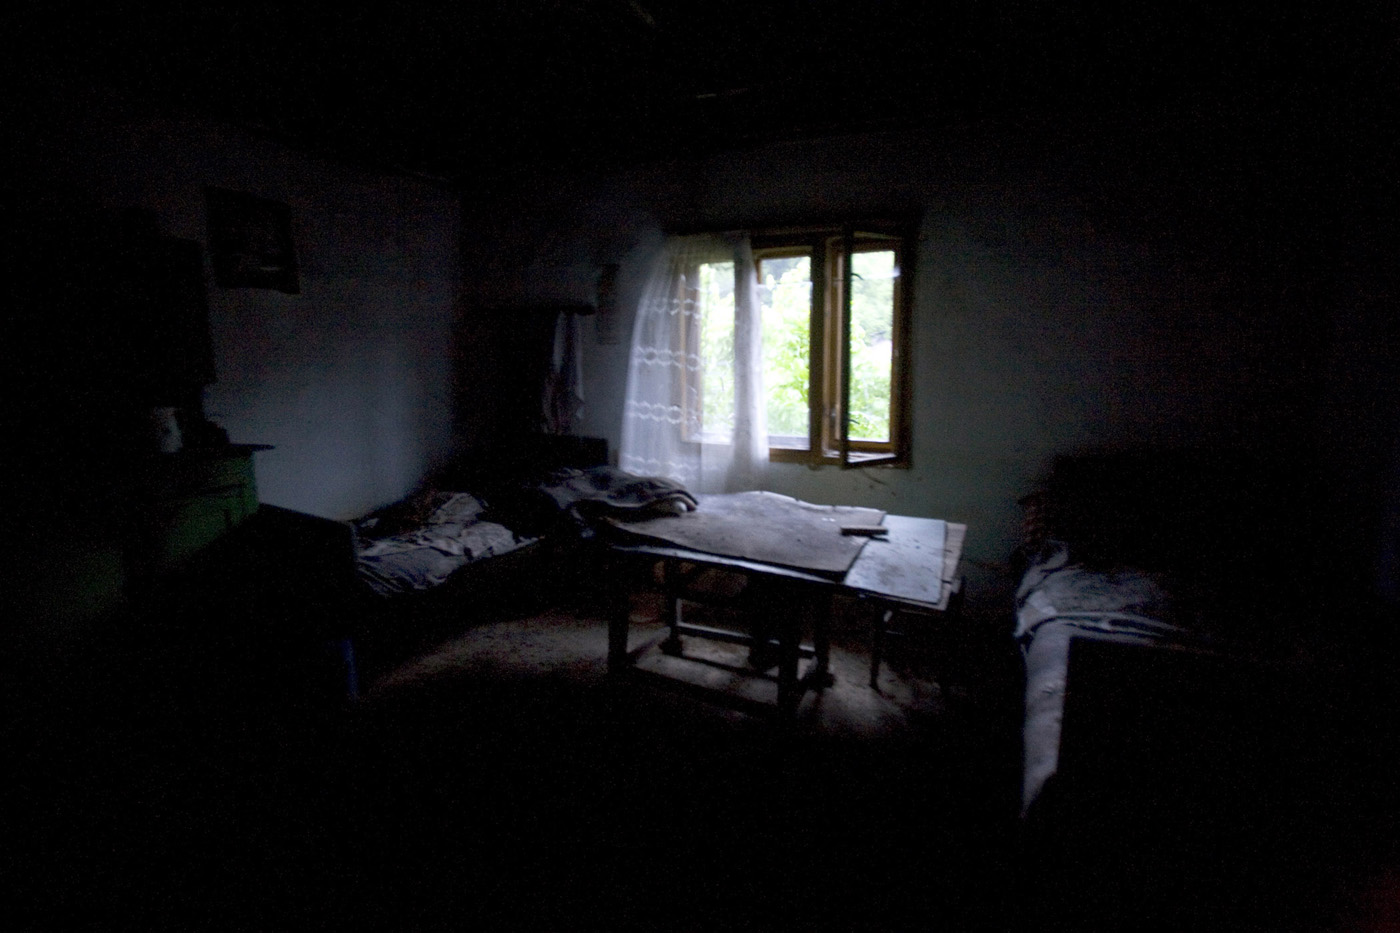 When the last villager of Repusnica died, his family just left all of his things and the house interior untouched. It looks the same as the day he died, and the whole village with him. Repusnica was just the first village with population of zero in this part of Serbia.